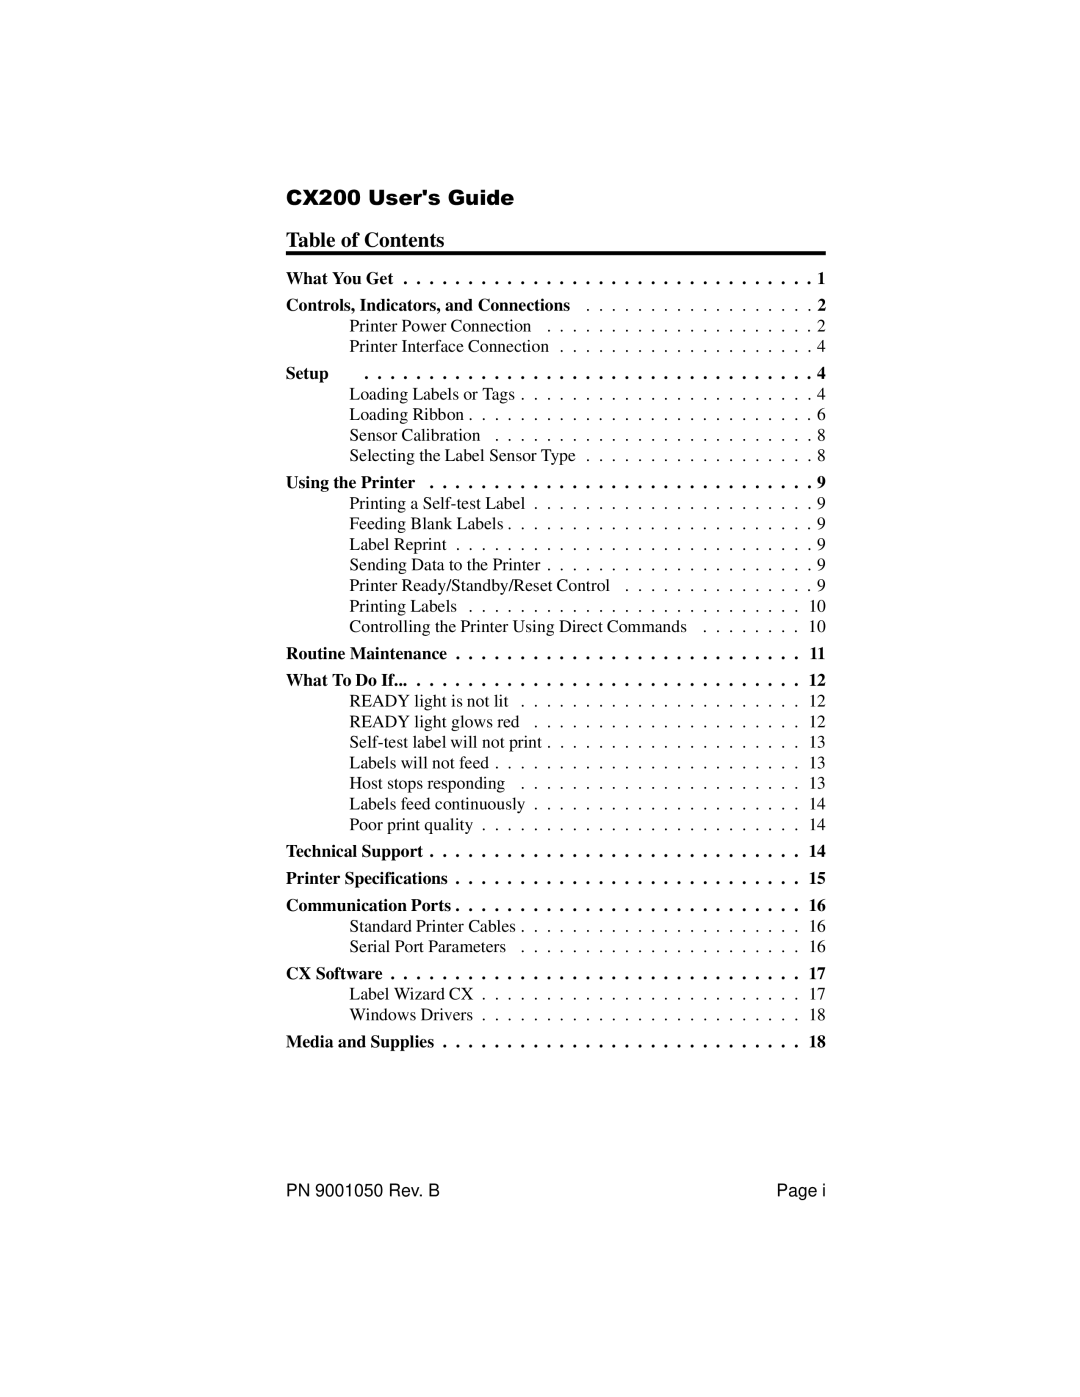 SATO CX200 Users Guide, Table of Contents, What You Get, Controls, Indicators, and Connections, Setup, What To Do If 